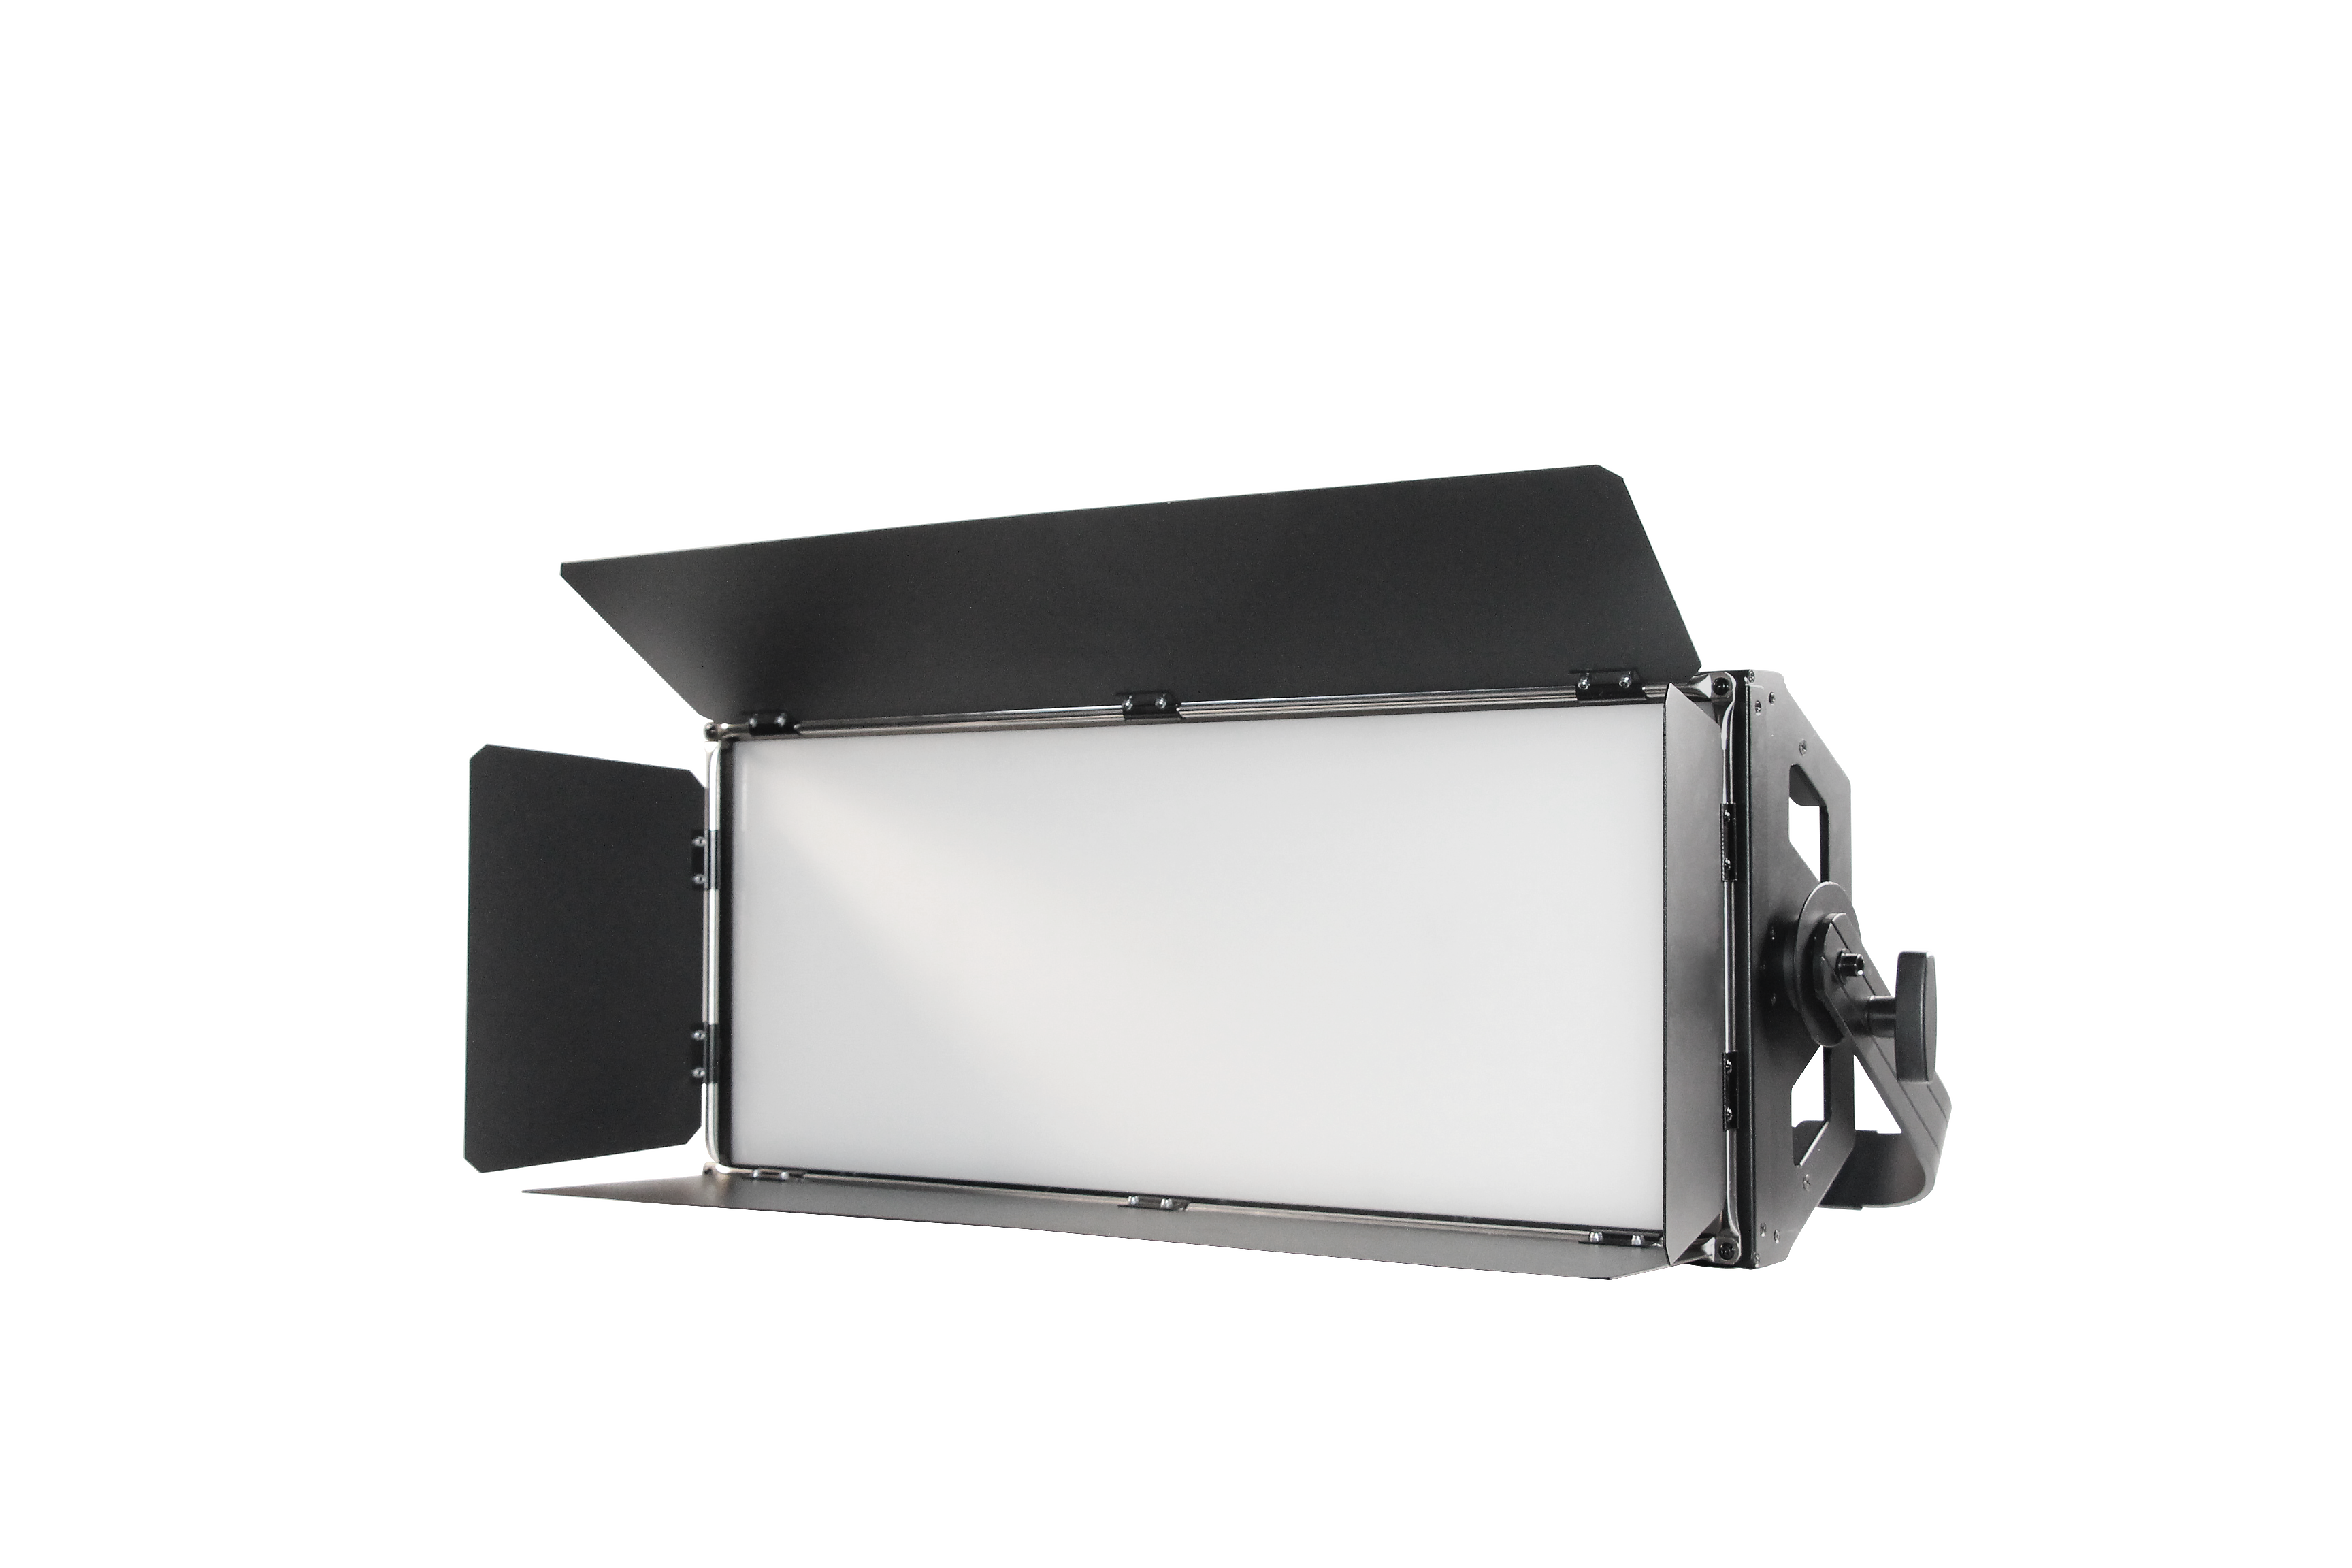 【 New Upgrade 】 The new product of studio panel light has been released, making the world's first new studio flat panel light!